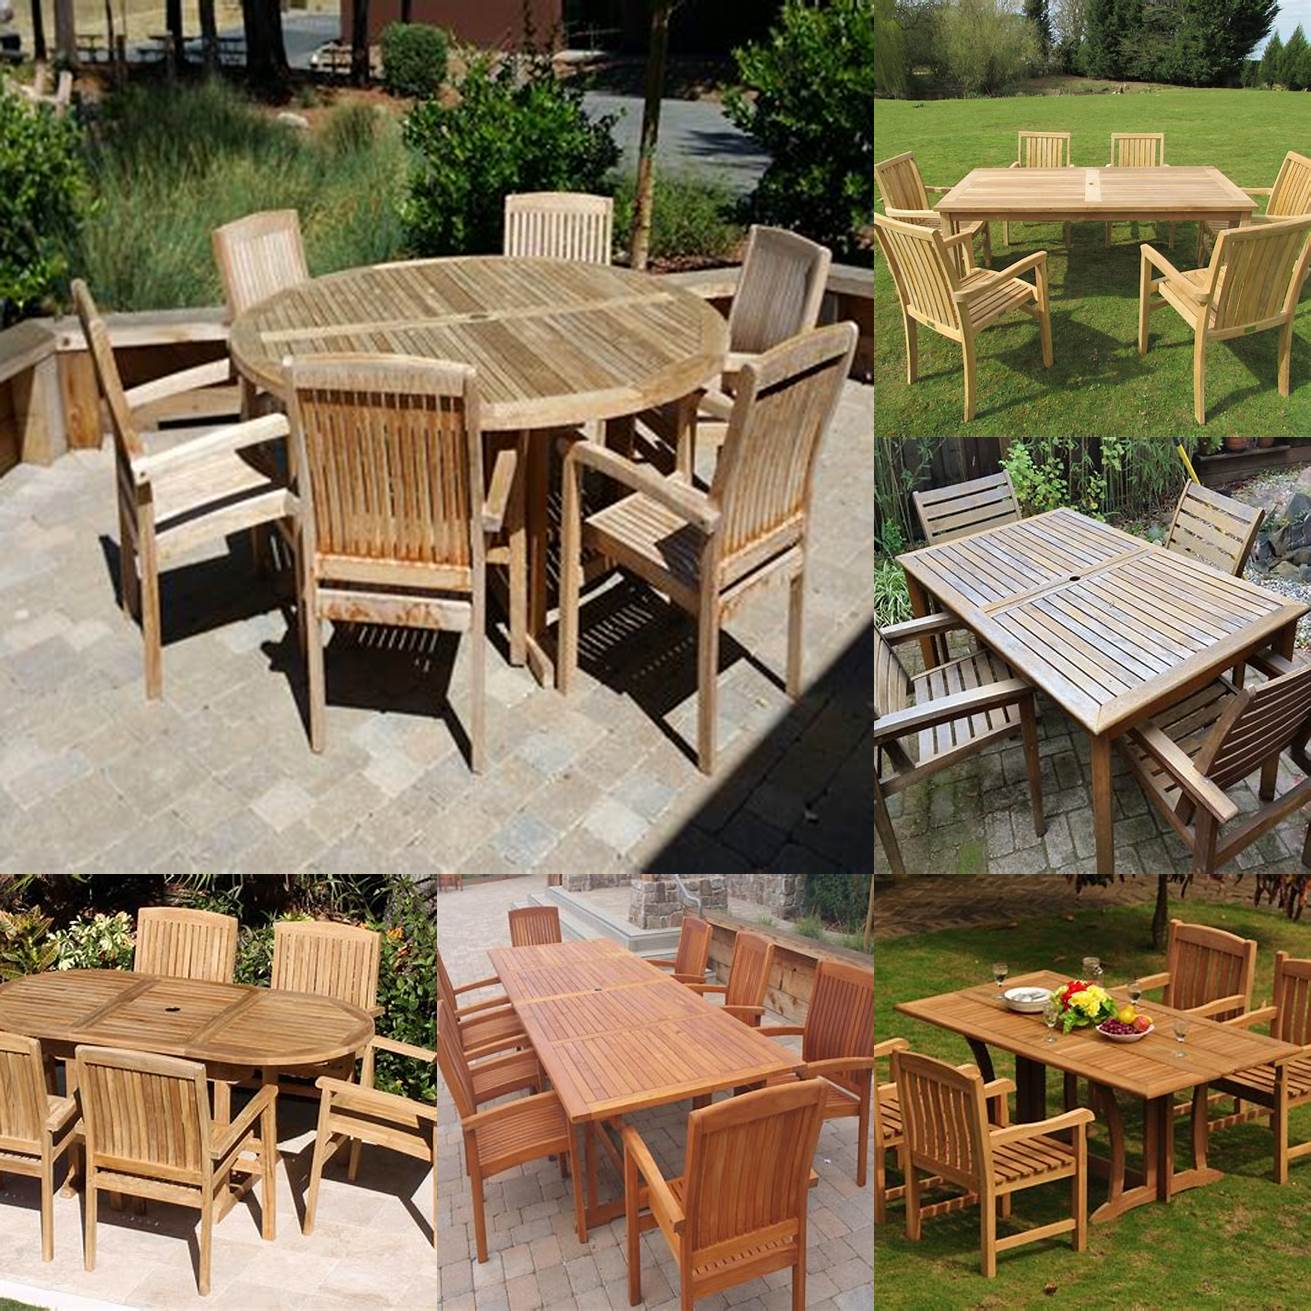 Teak Furniture in Any Environment